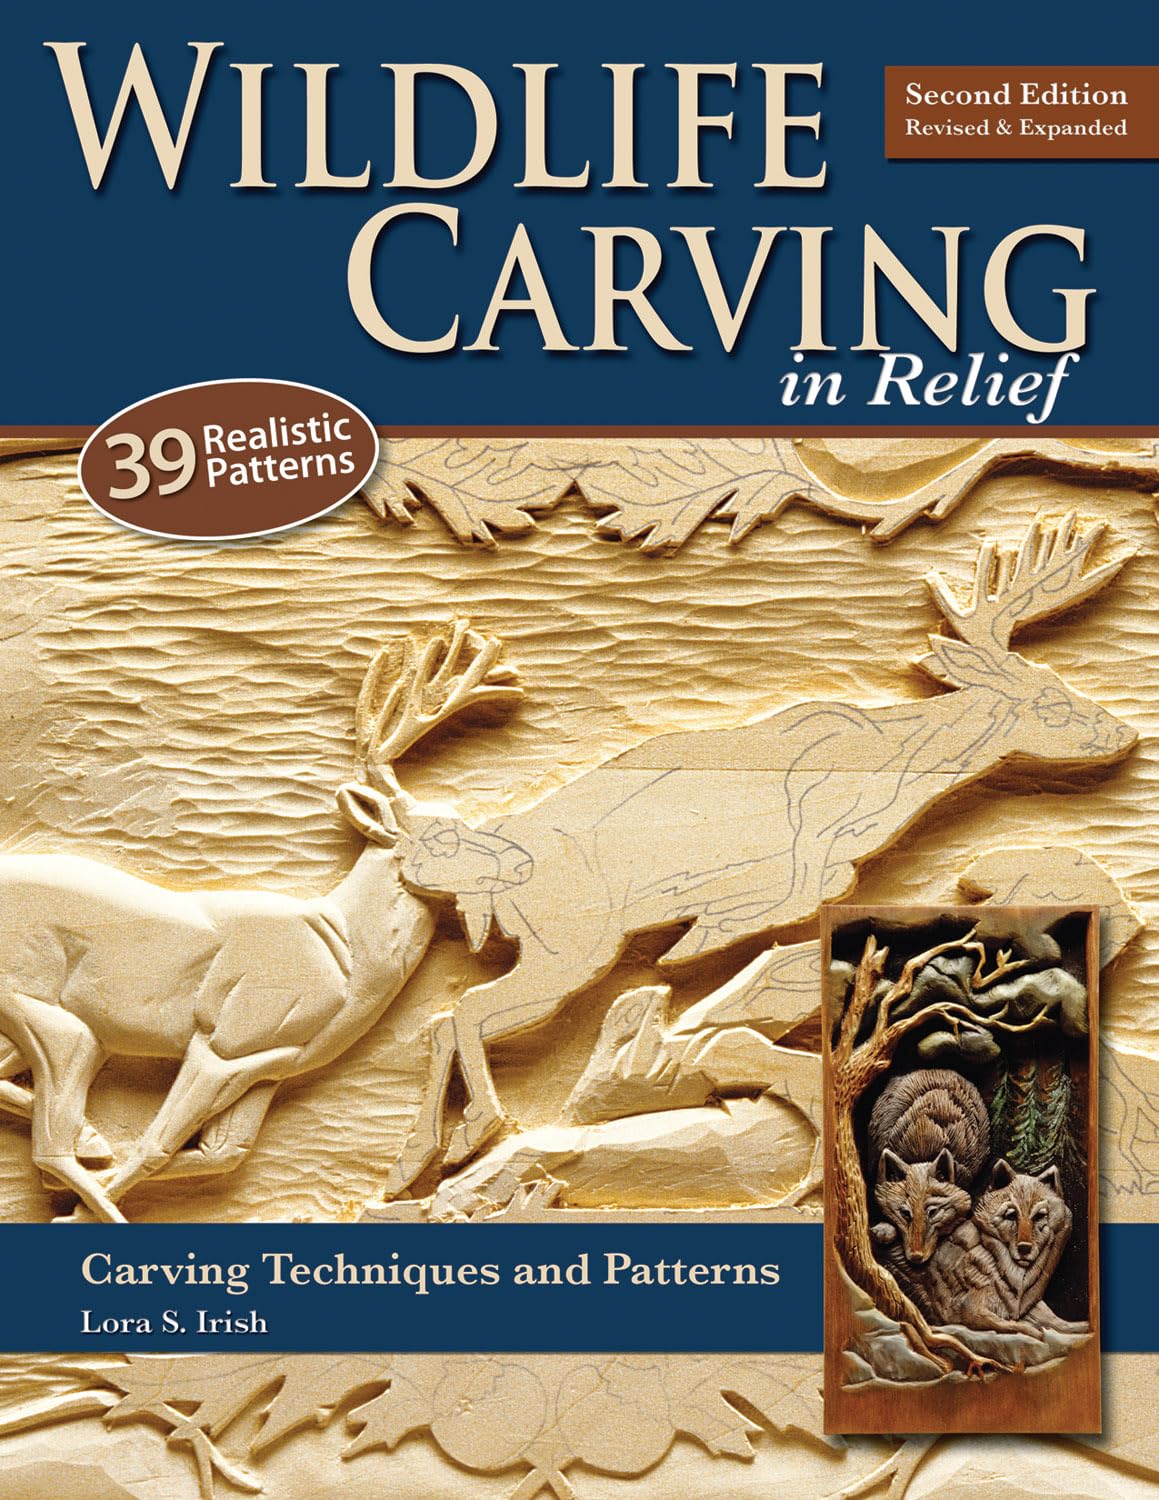 Wildlife Carving in Relief, Second Edition Revised and Expanded: Carving Techniques and Patterns (Fox Chapel Publishing) 39 Line & Shaded Patterns